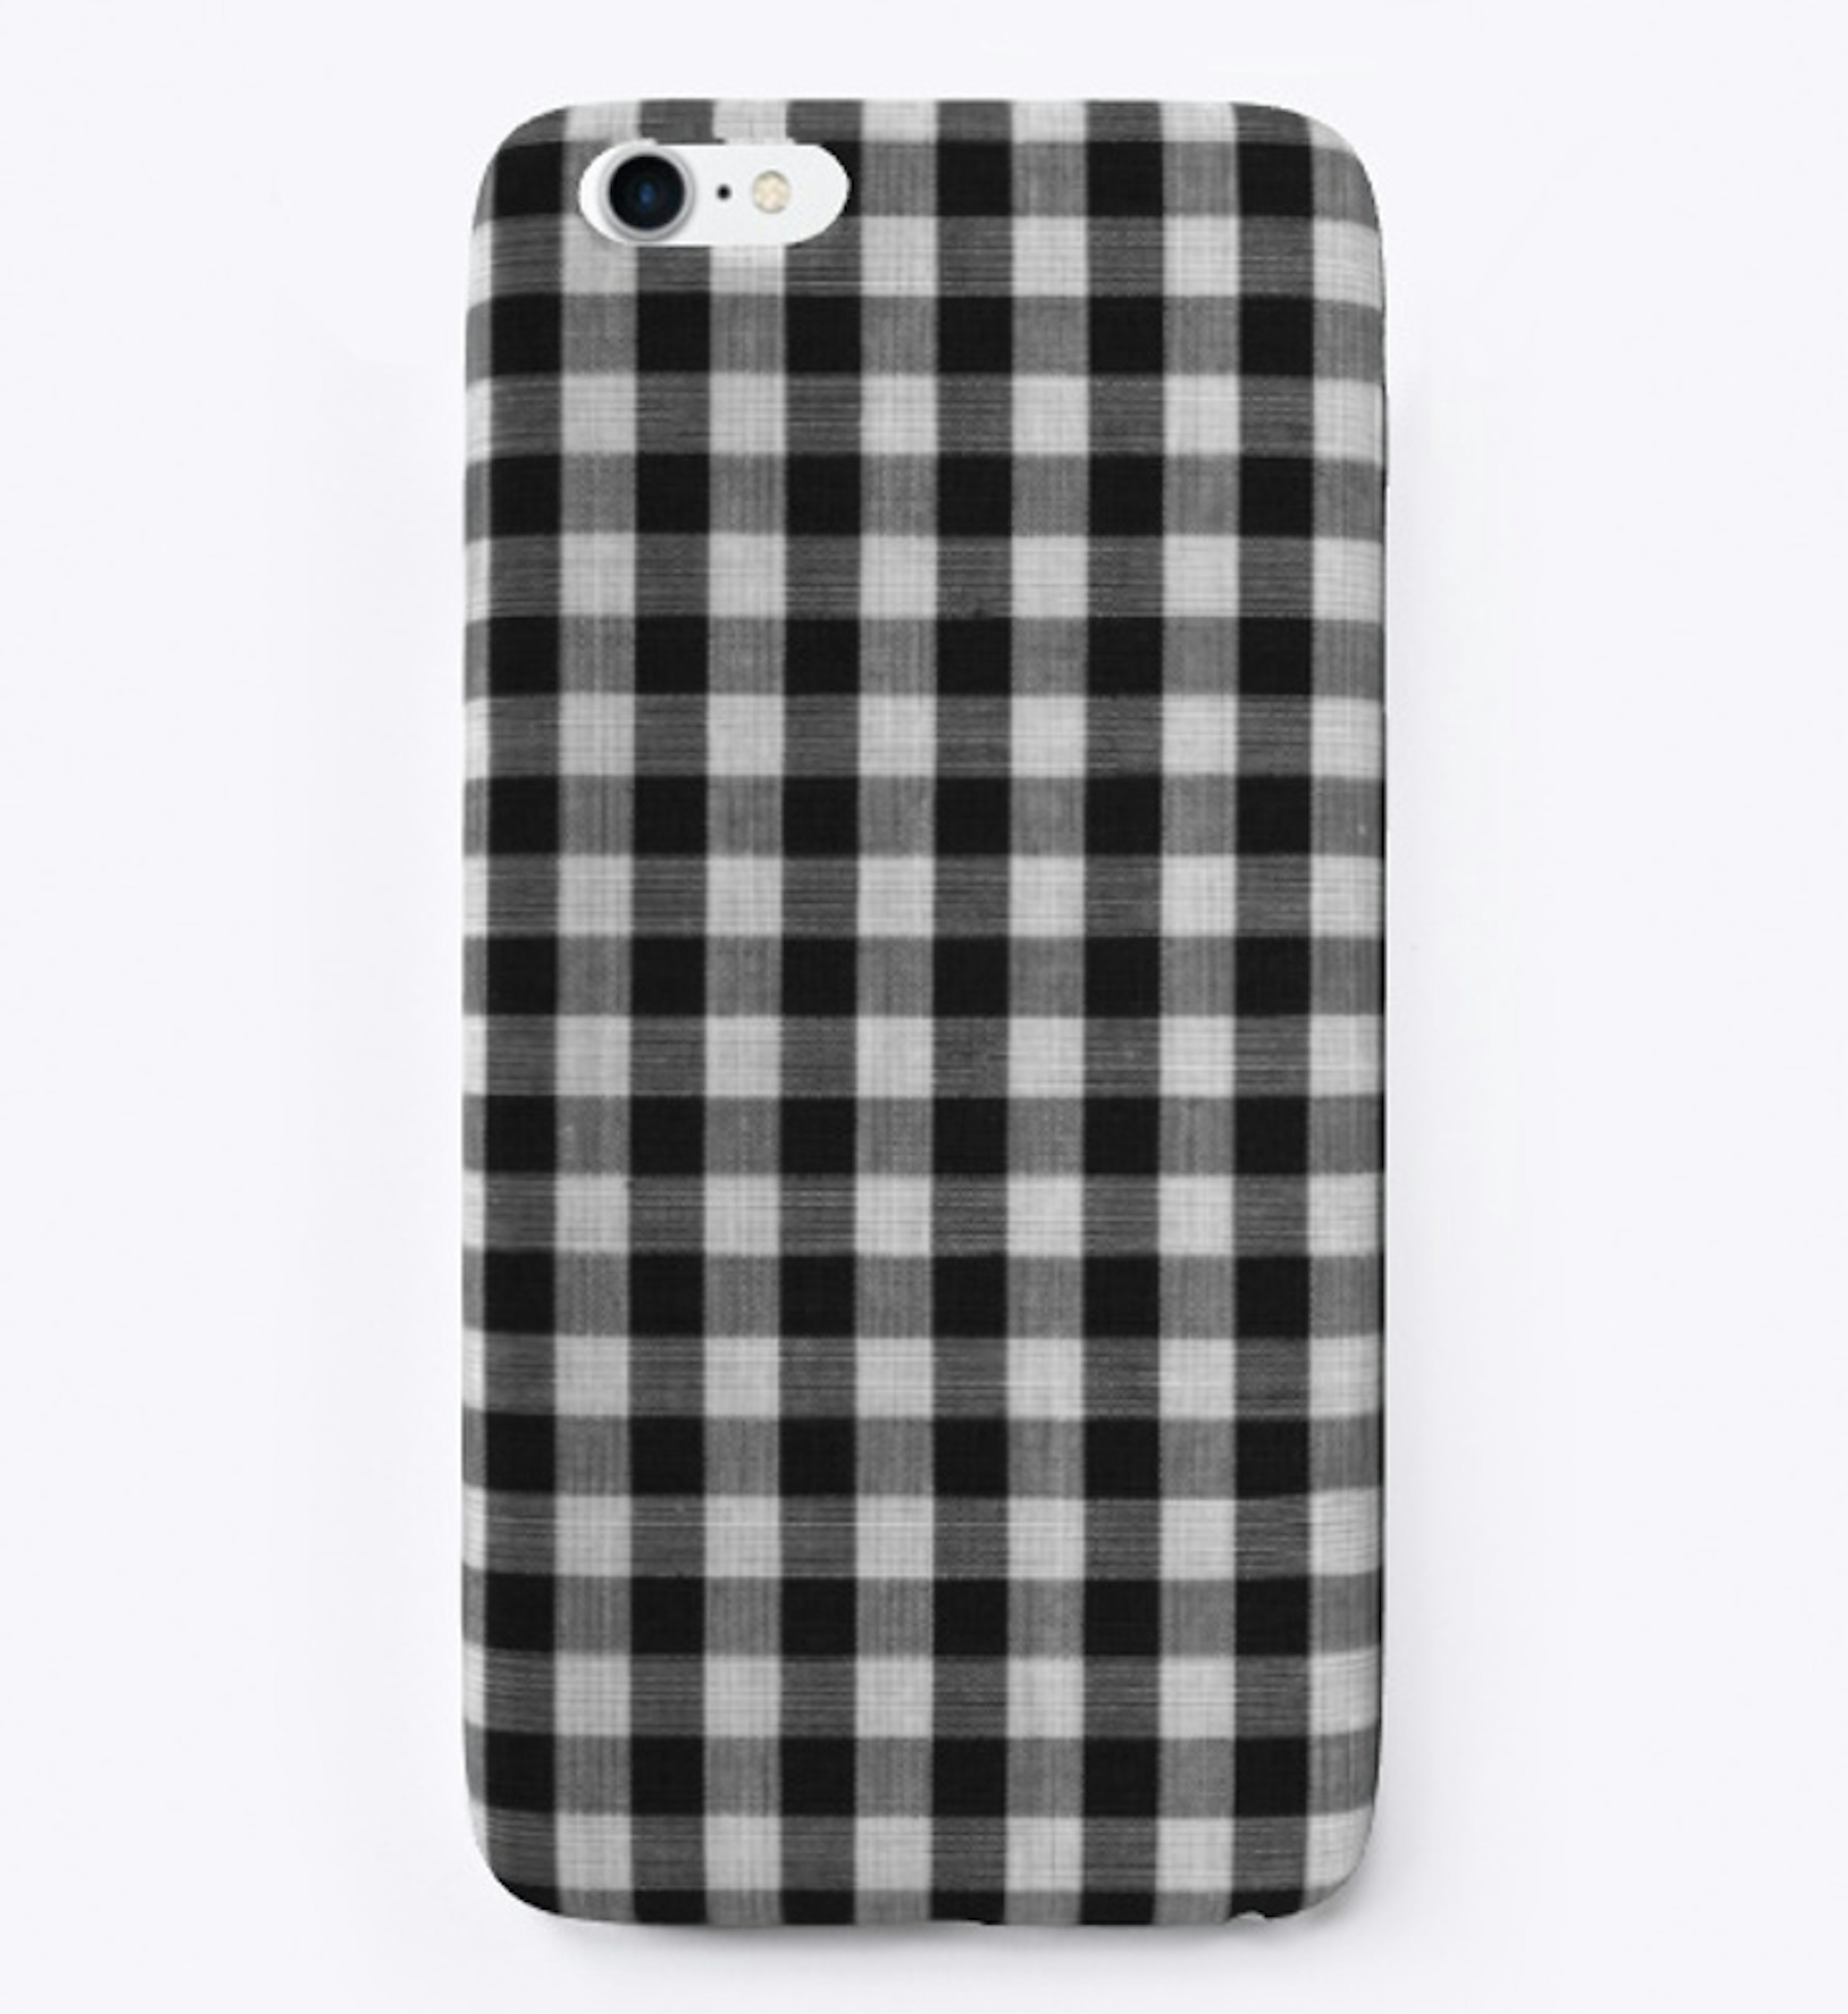 Phone Case (Checkers)